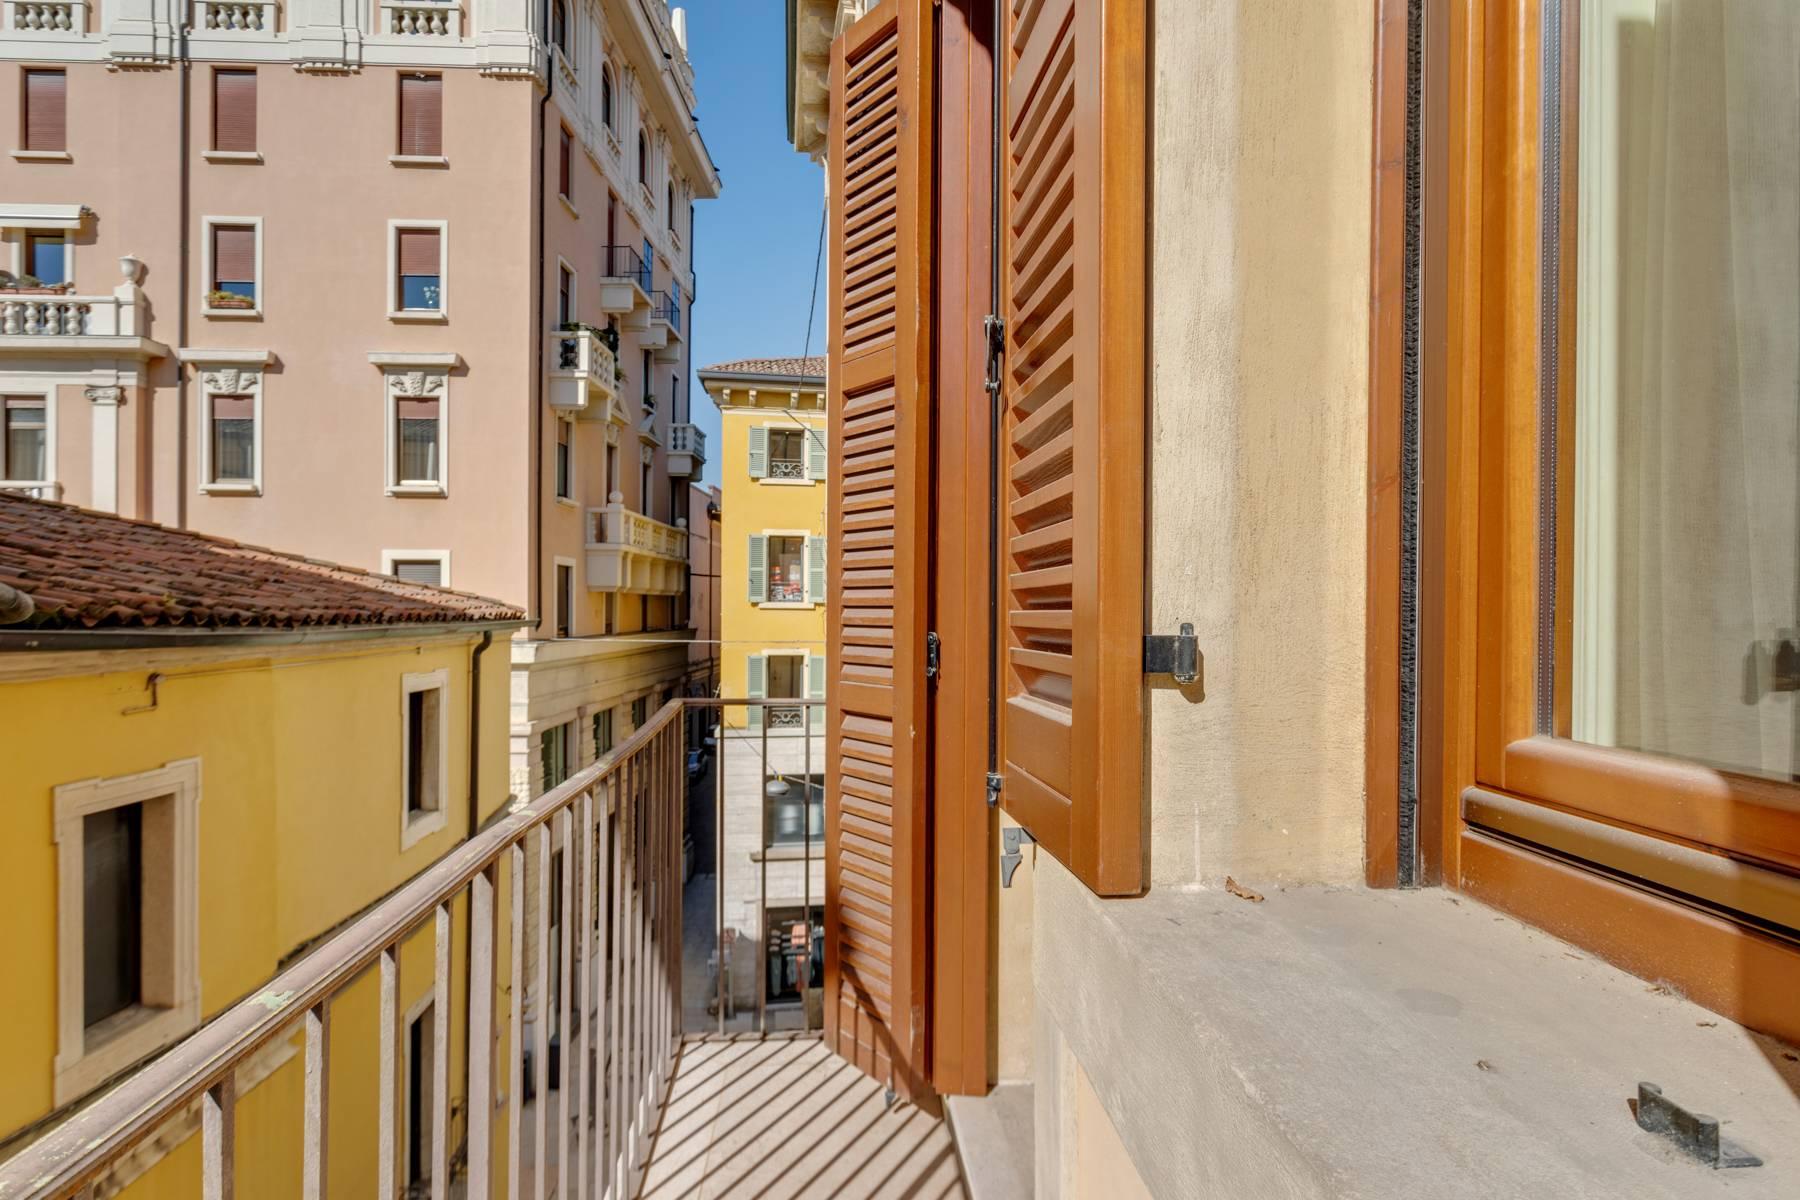 Exquisite apartment just few steps away from Piazza delle Erbe - 16